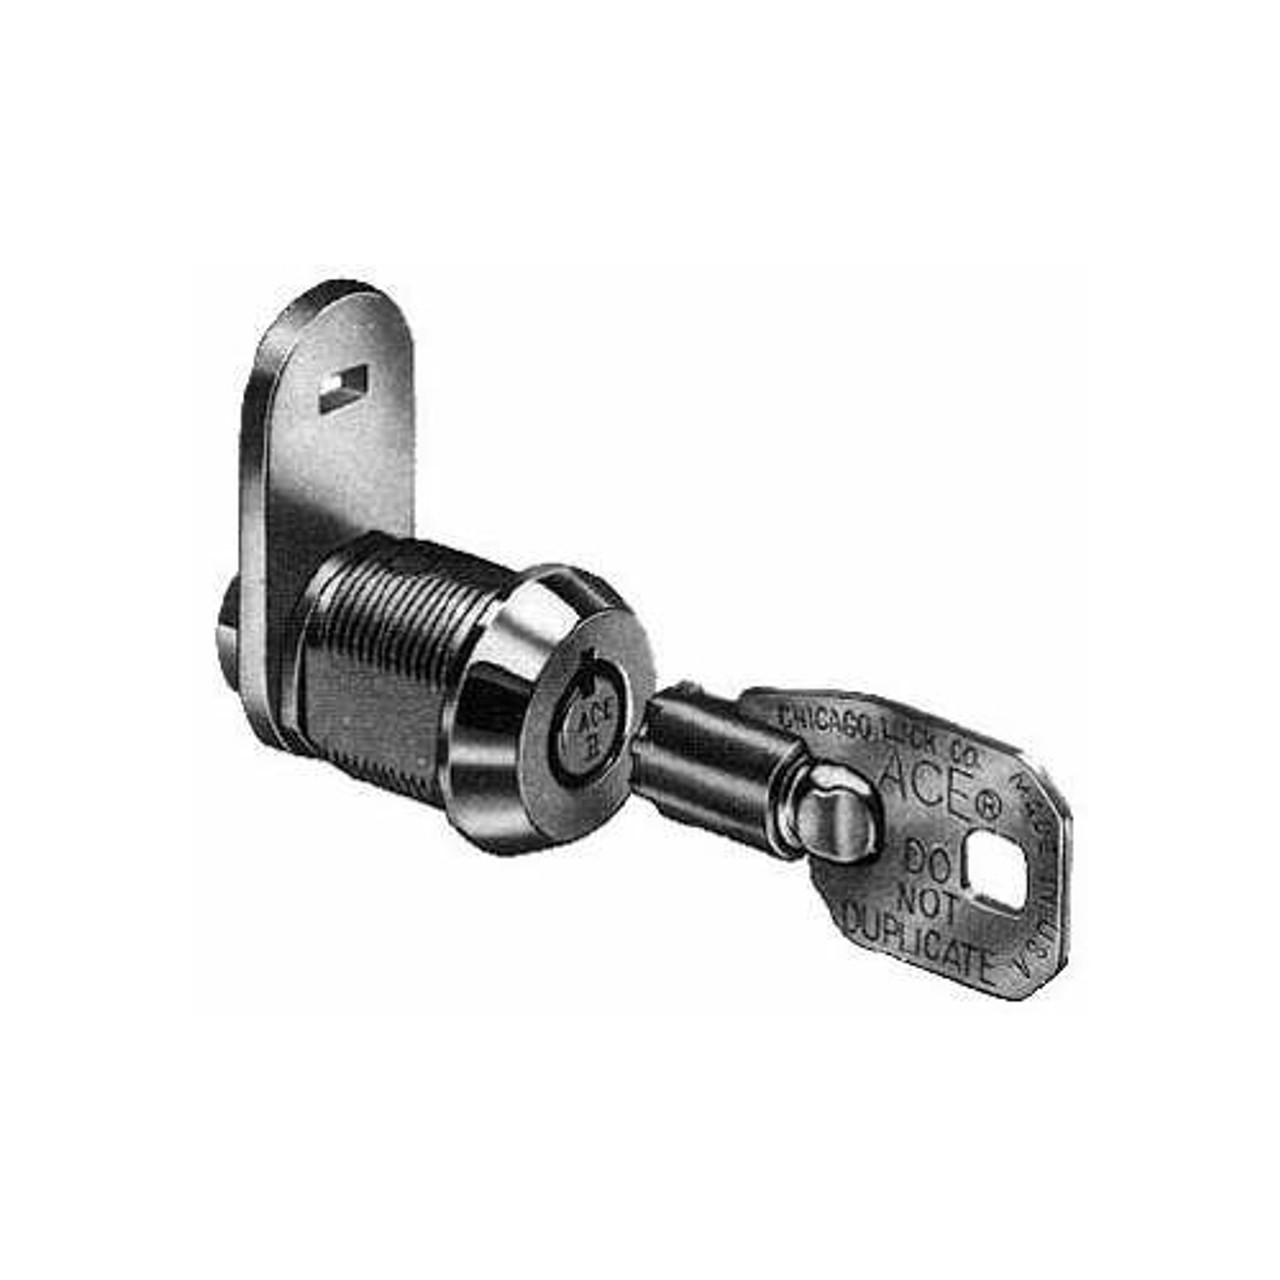 High Quality Cam Lock Cylinder for File Cabinet Lock Replacement